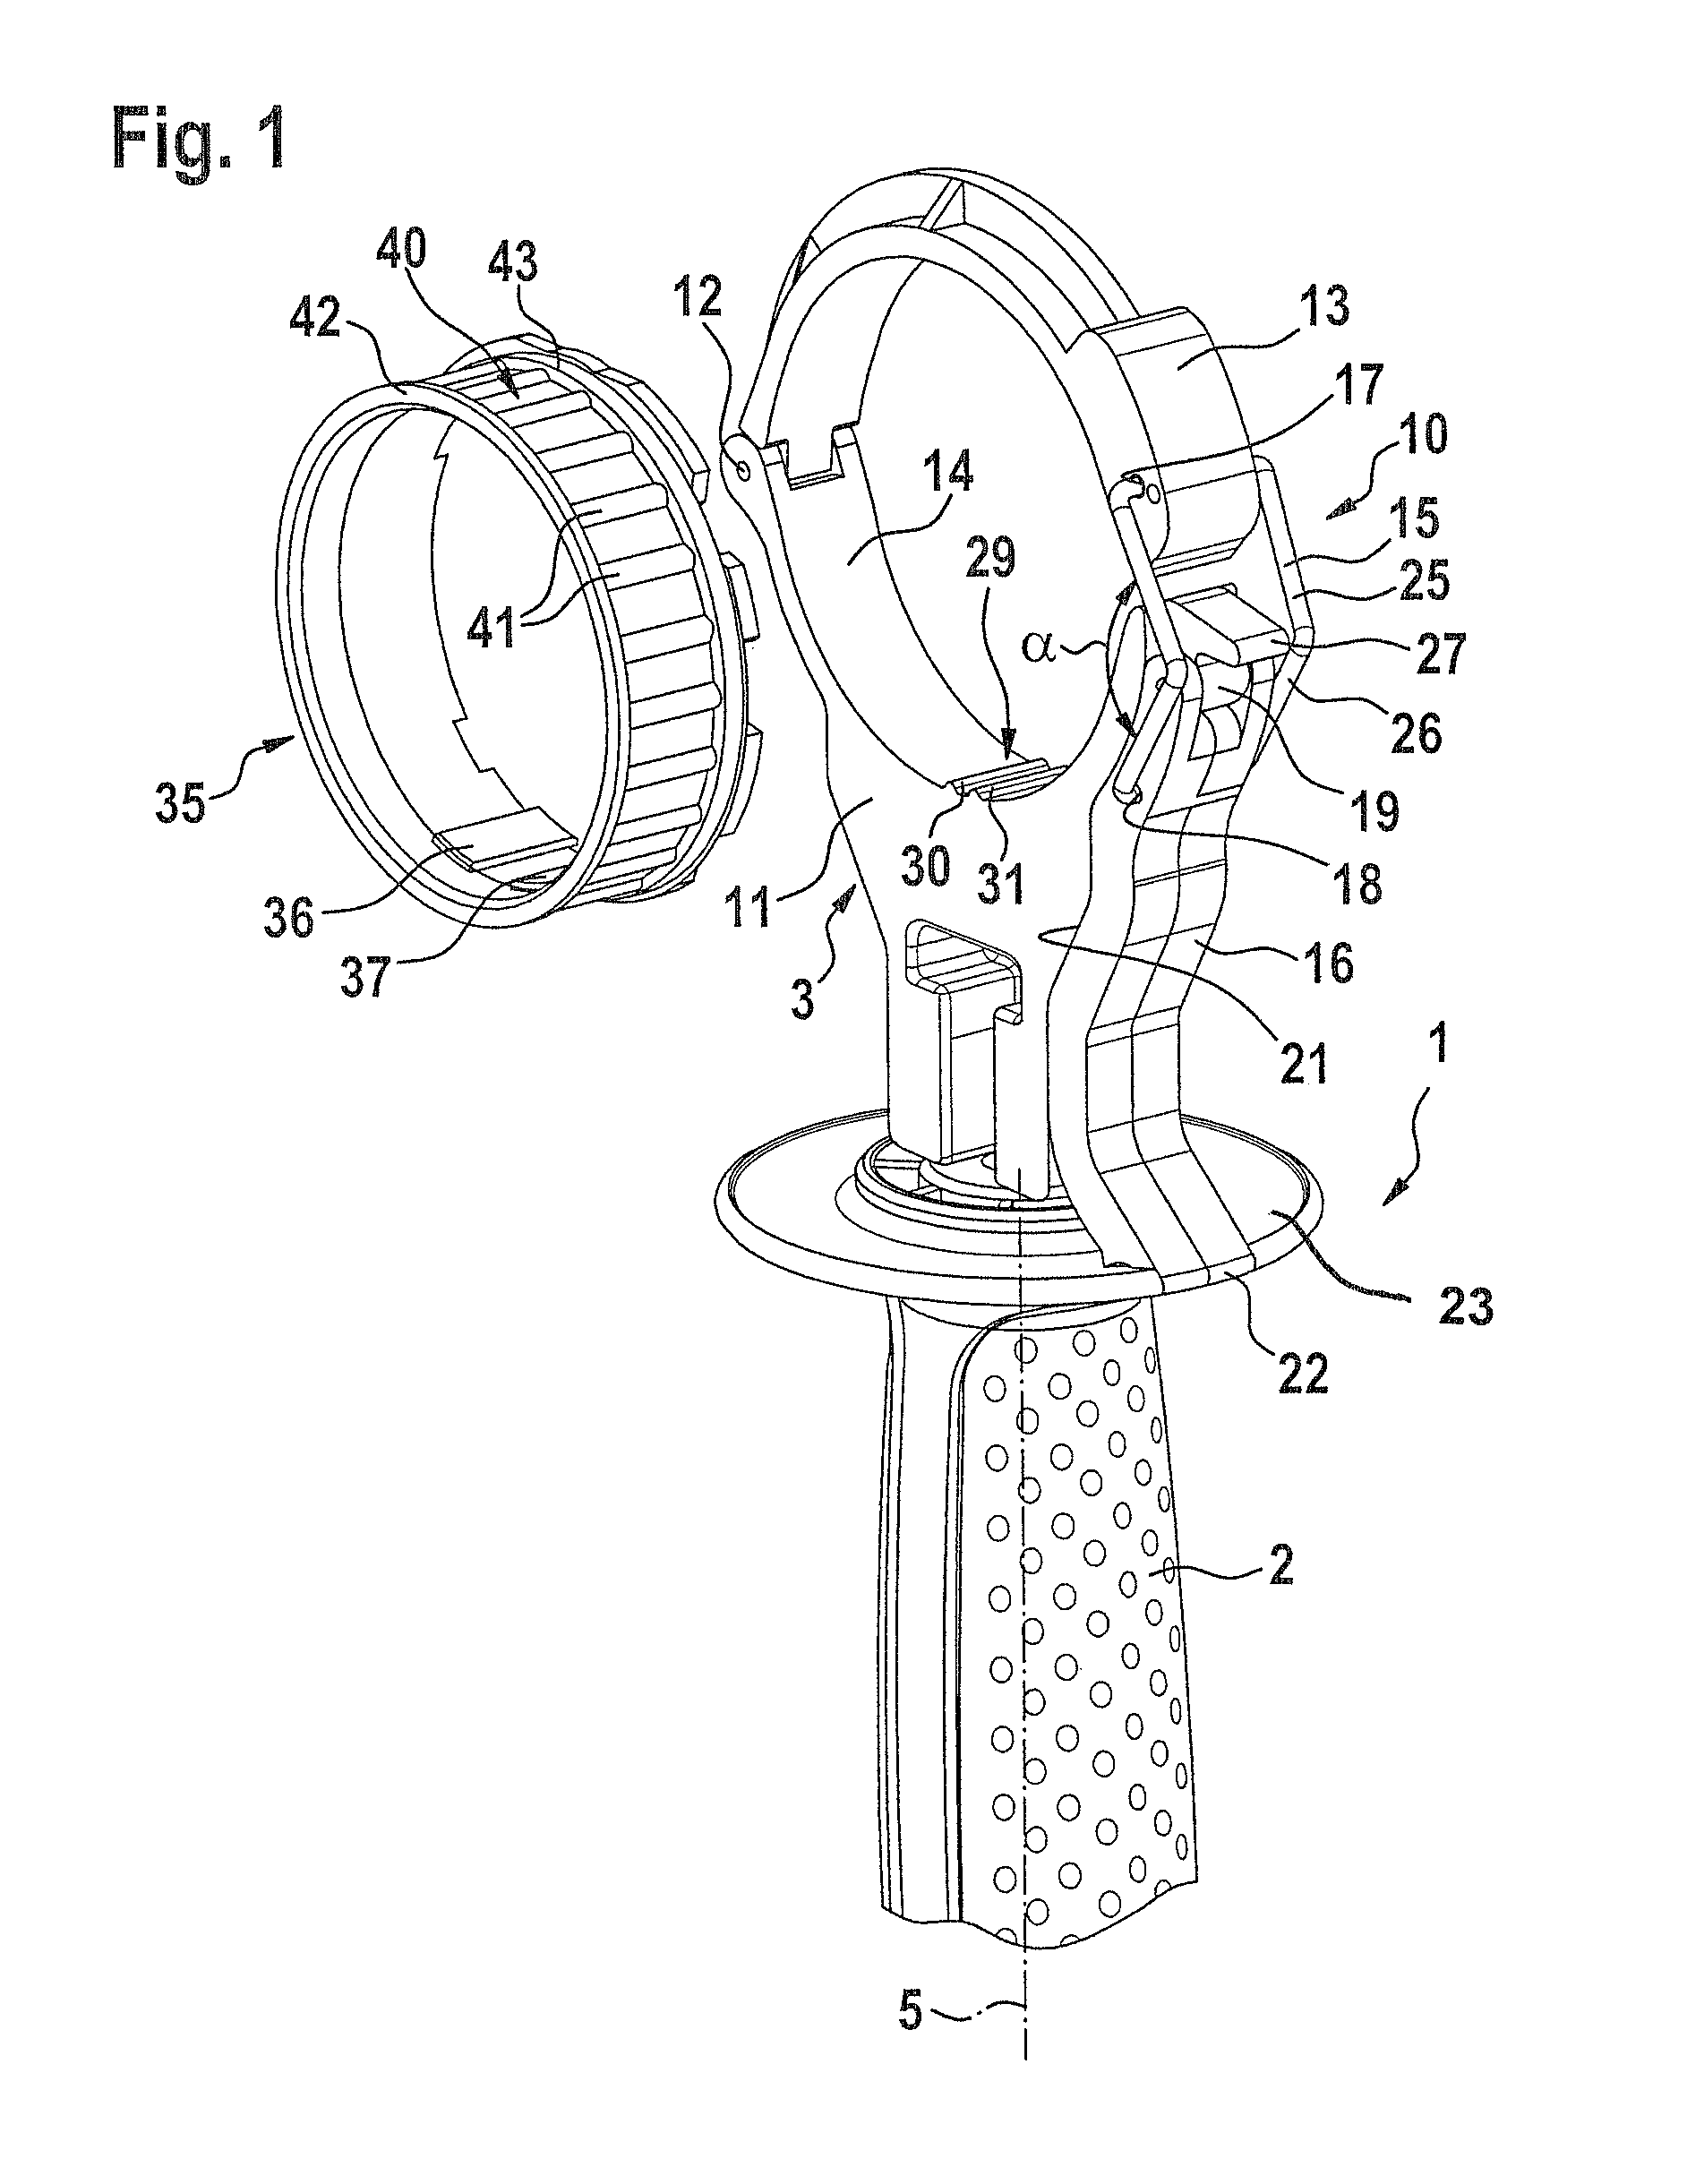 Apparatus for fastening a handle on a power tool